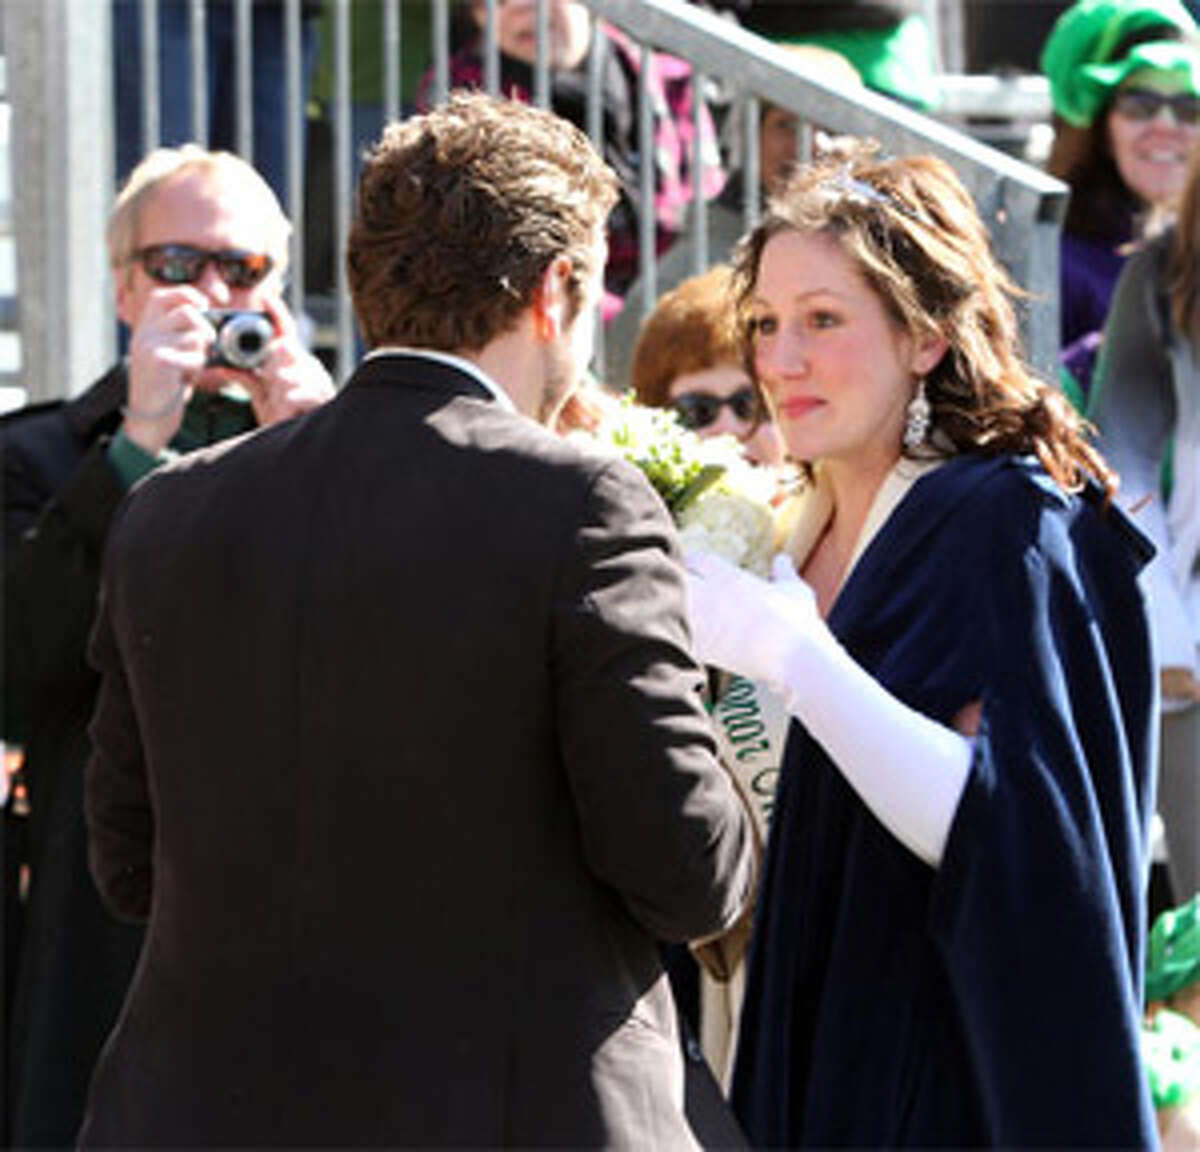 Kate Thompson with her fiancé, Dan Carr, as he proposes near the grandstand of the St. Patrick’s Day parade in New Haven.